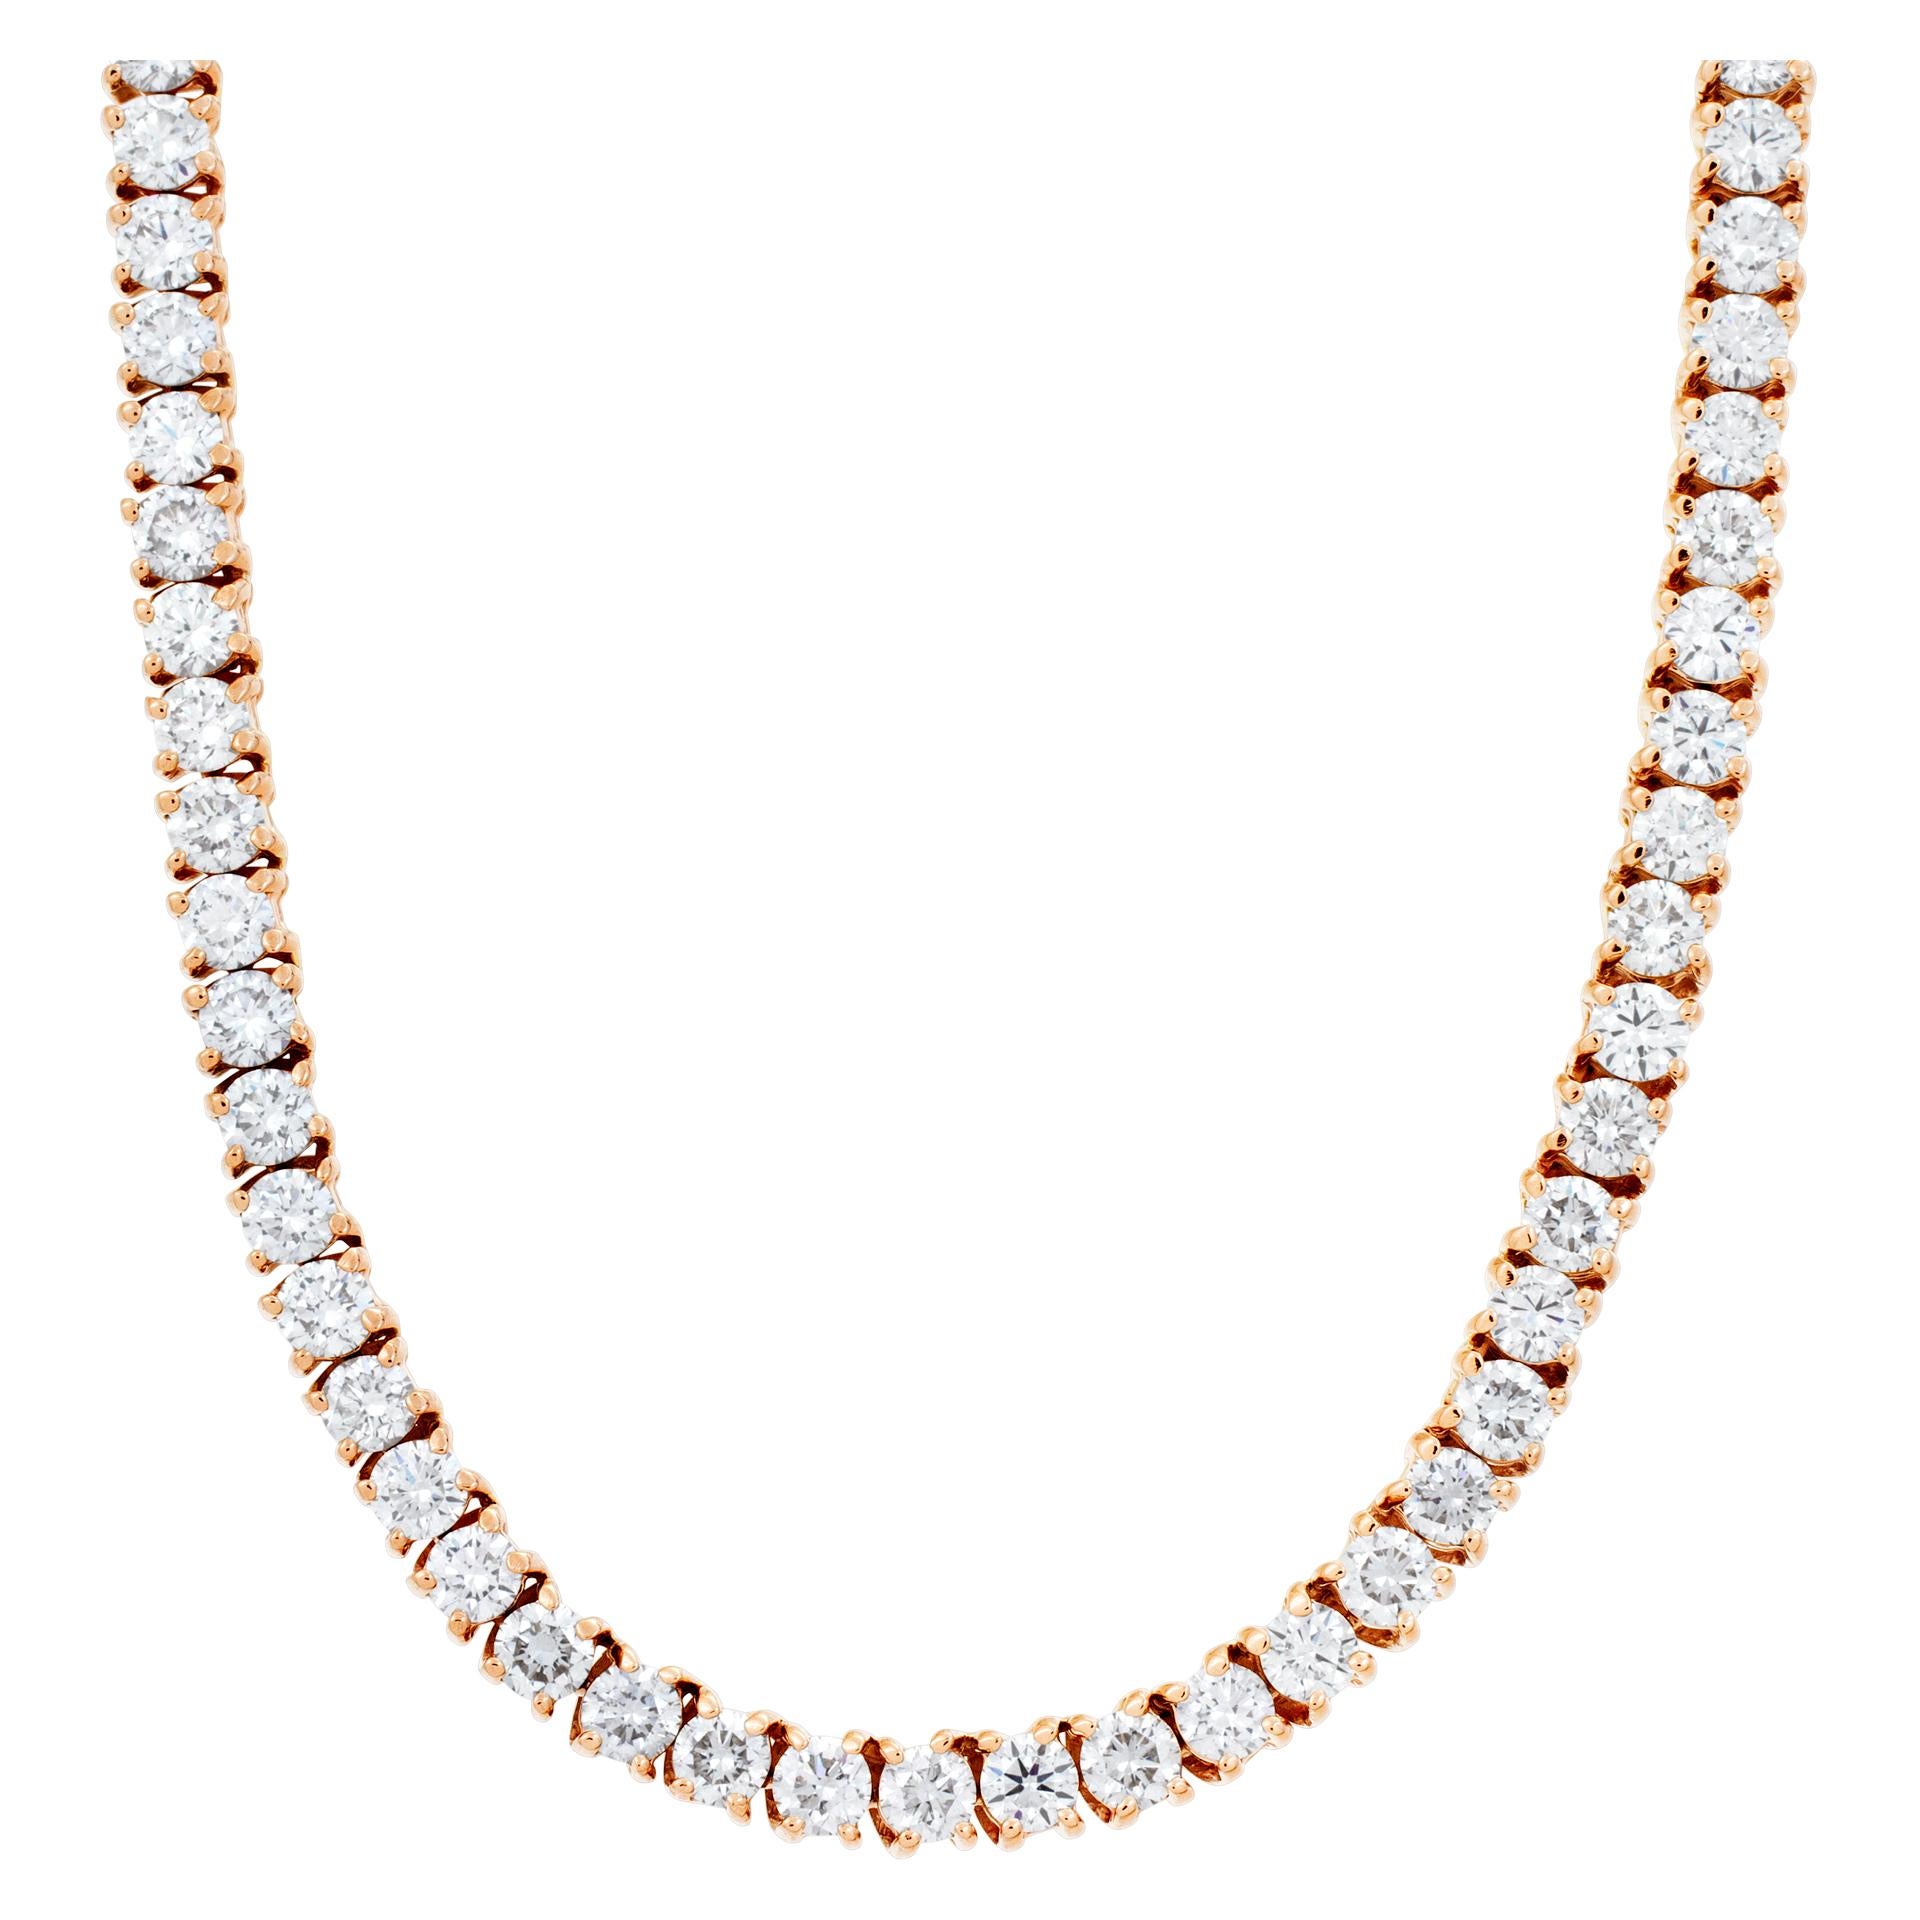 Line Diamonds necklace with 17.85 carats full cut round brilliant diamonds set in 14K rose gold. 22 inches long x 3.5mm
